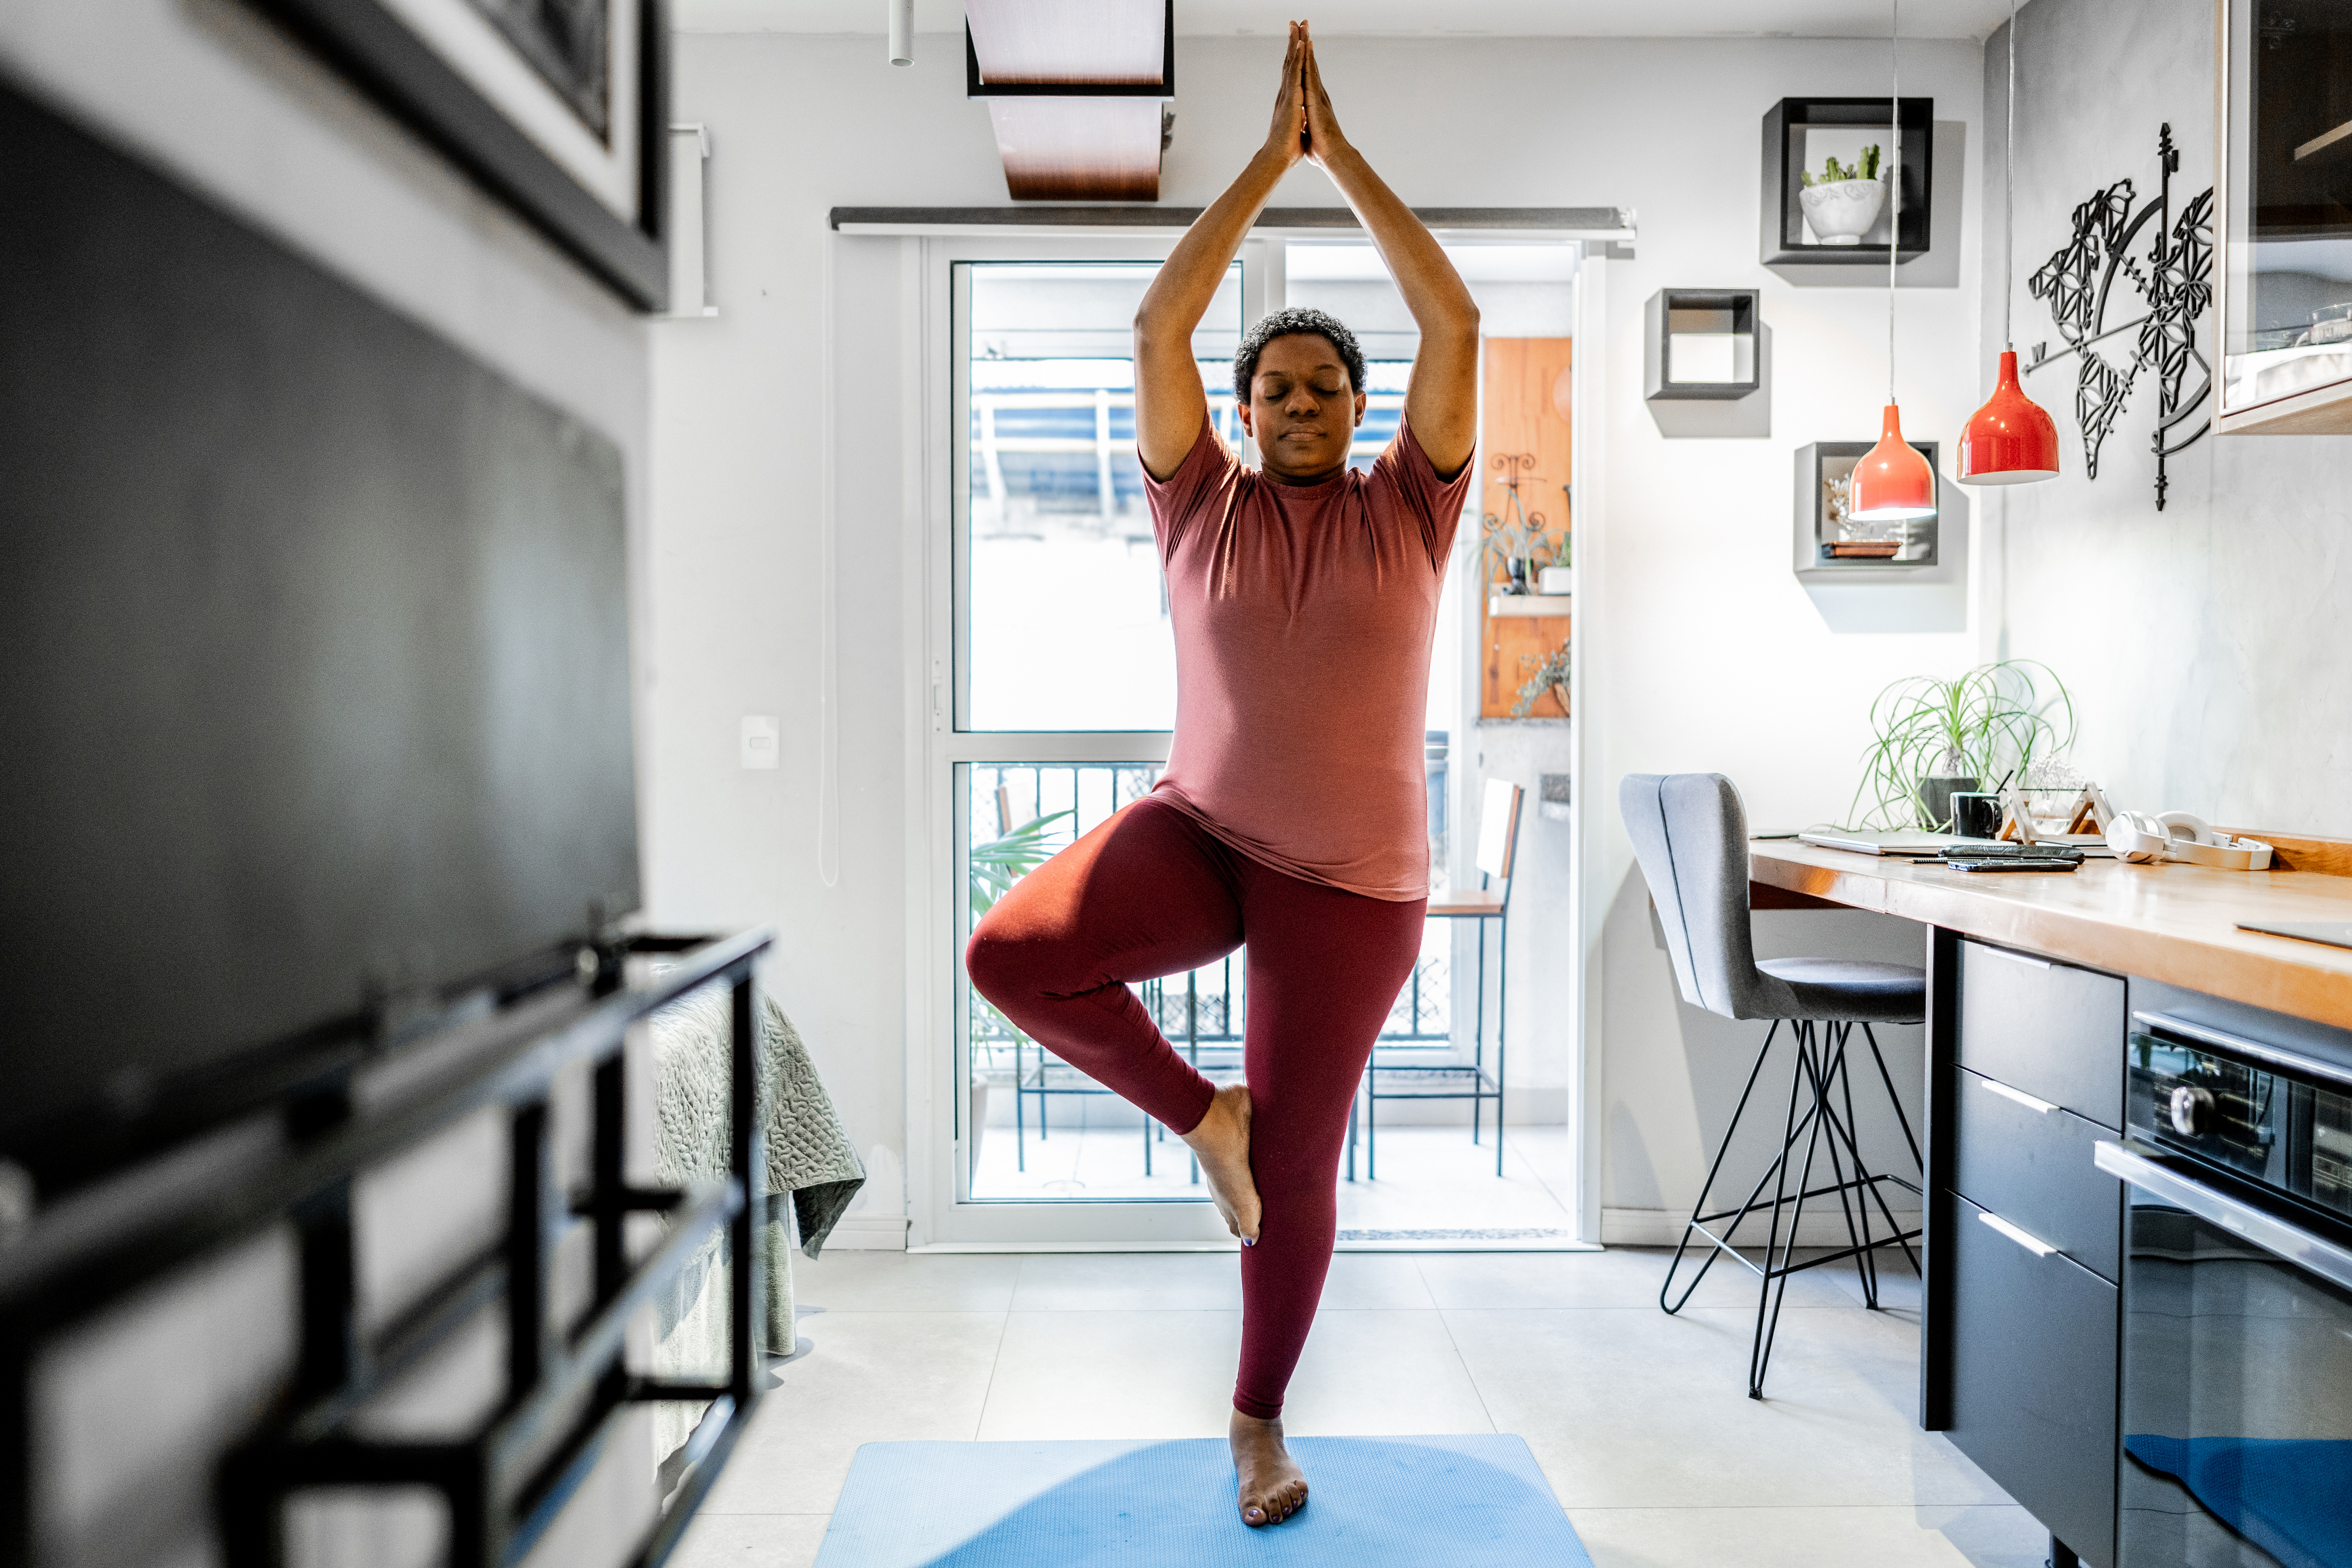 Woman practicing tree pose on a yoga mat in a home kitchen